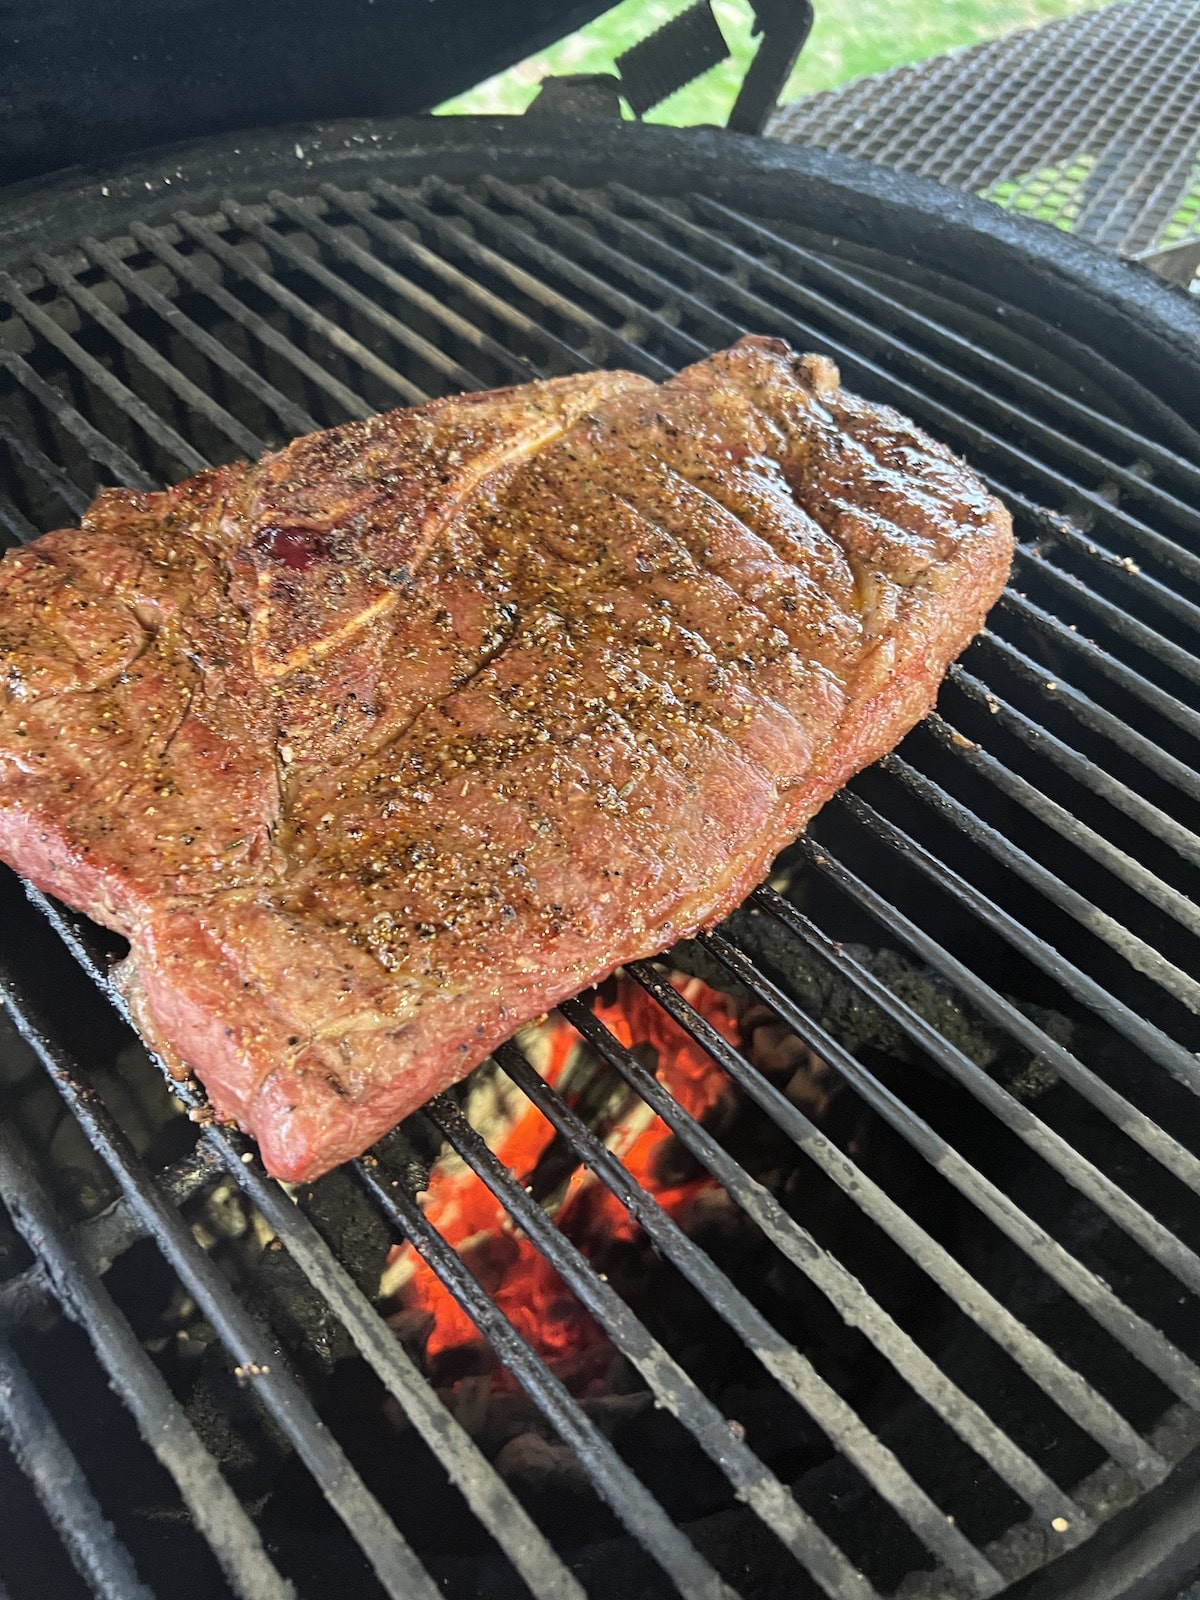 Grilling Sirloin Steak on a charcoal grill.